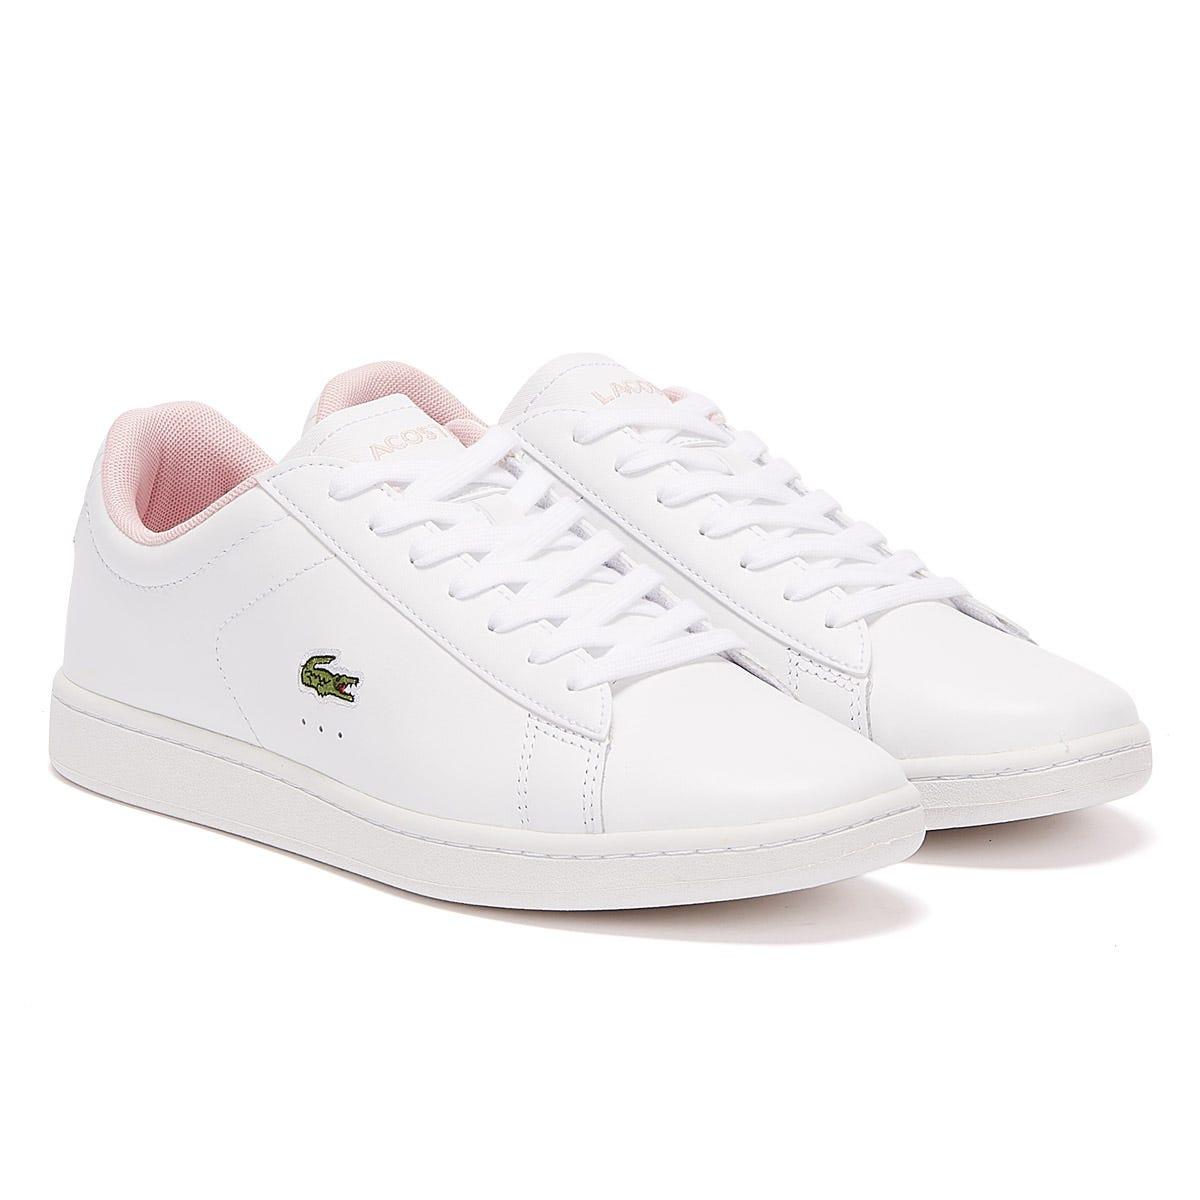 Womens Lacoste White Sneakers Greece, SAVE 54% - aveclumiere.com